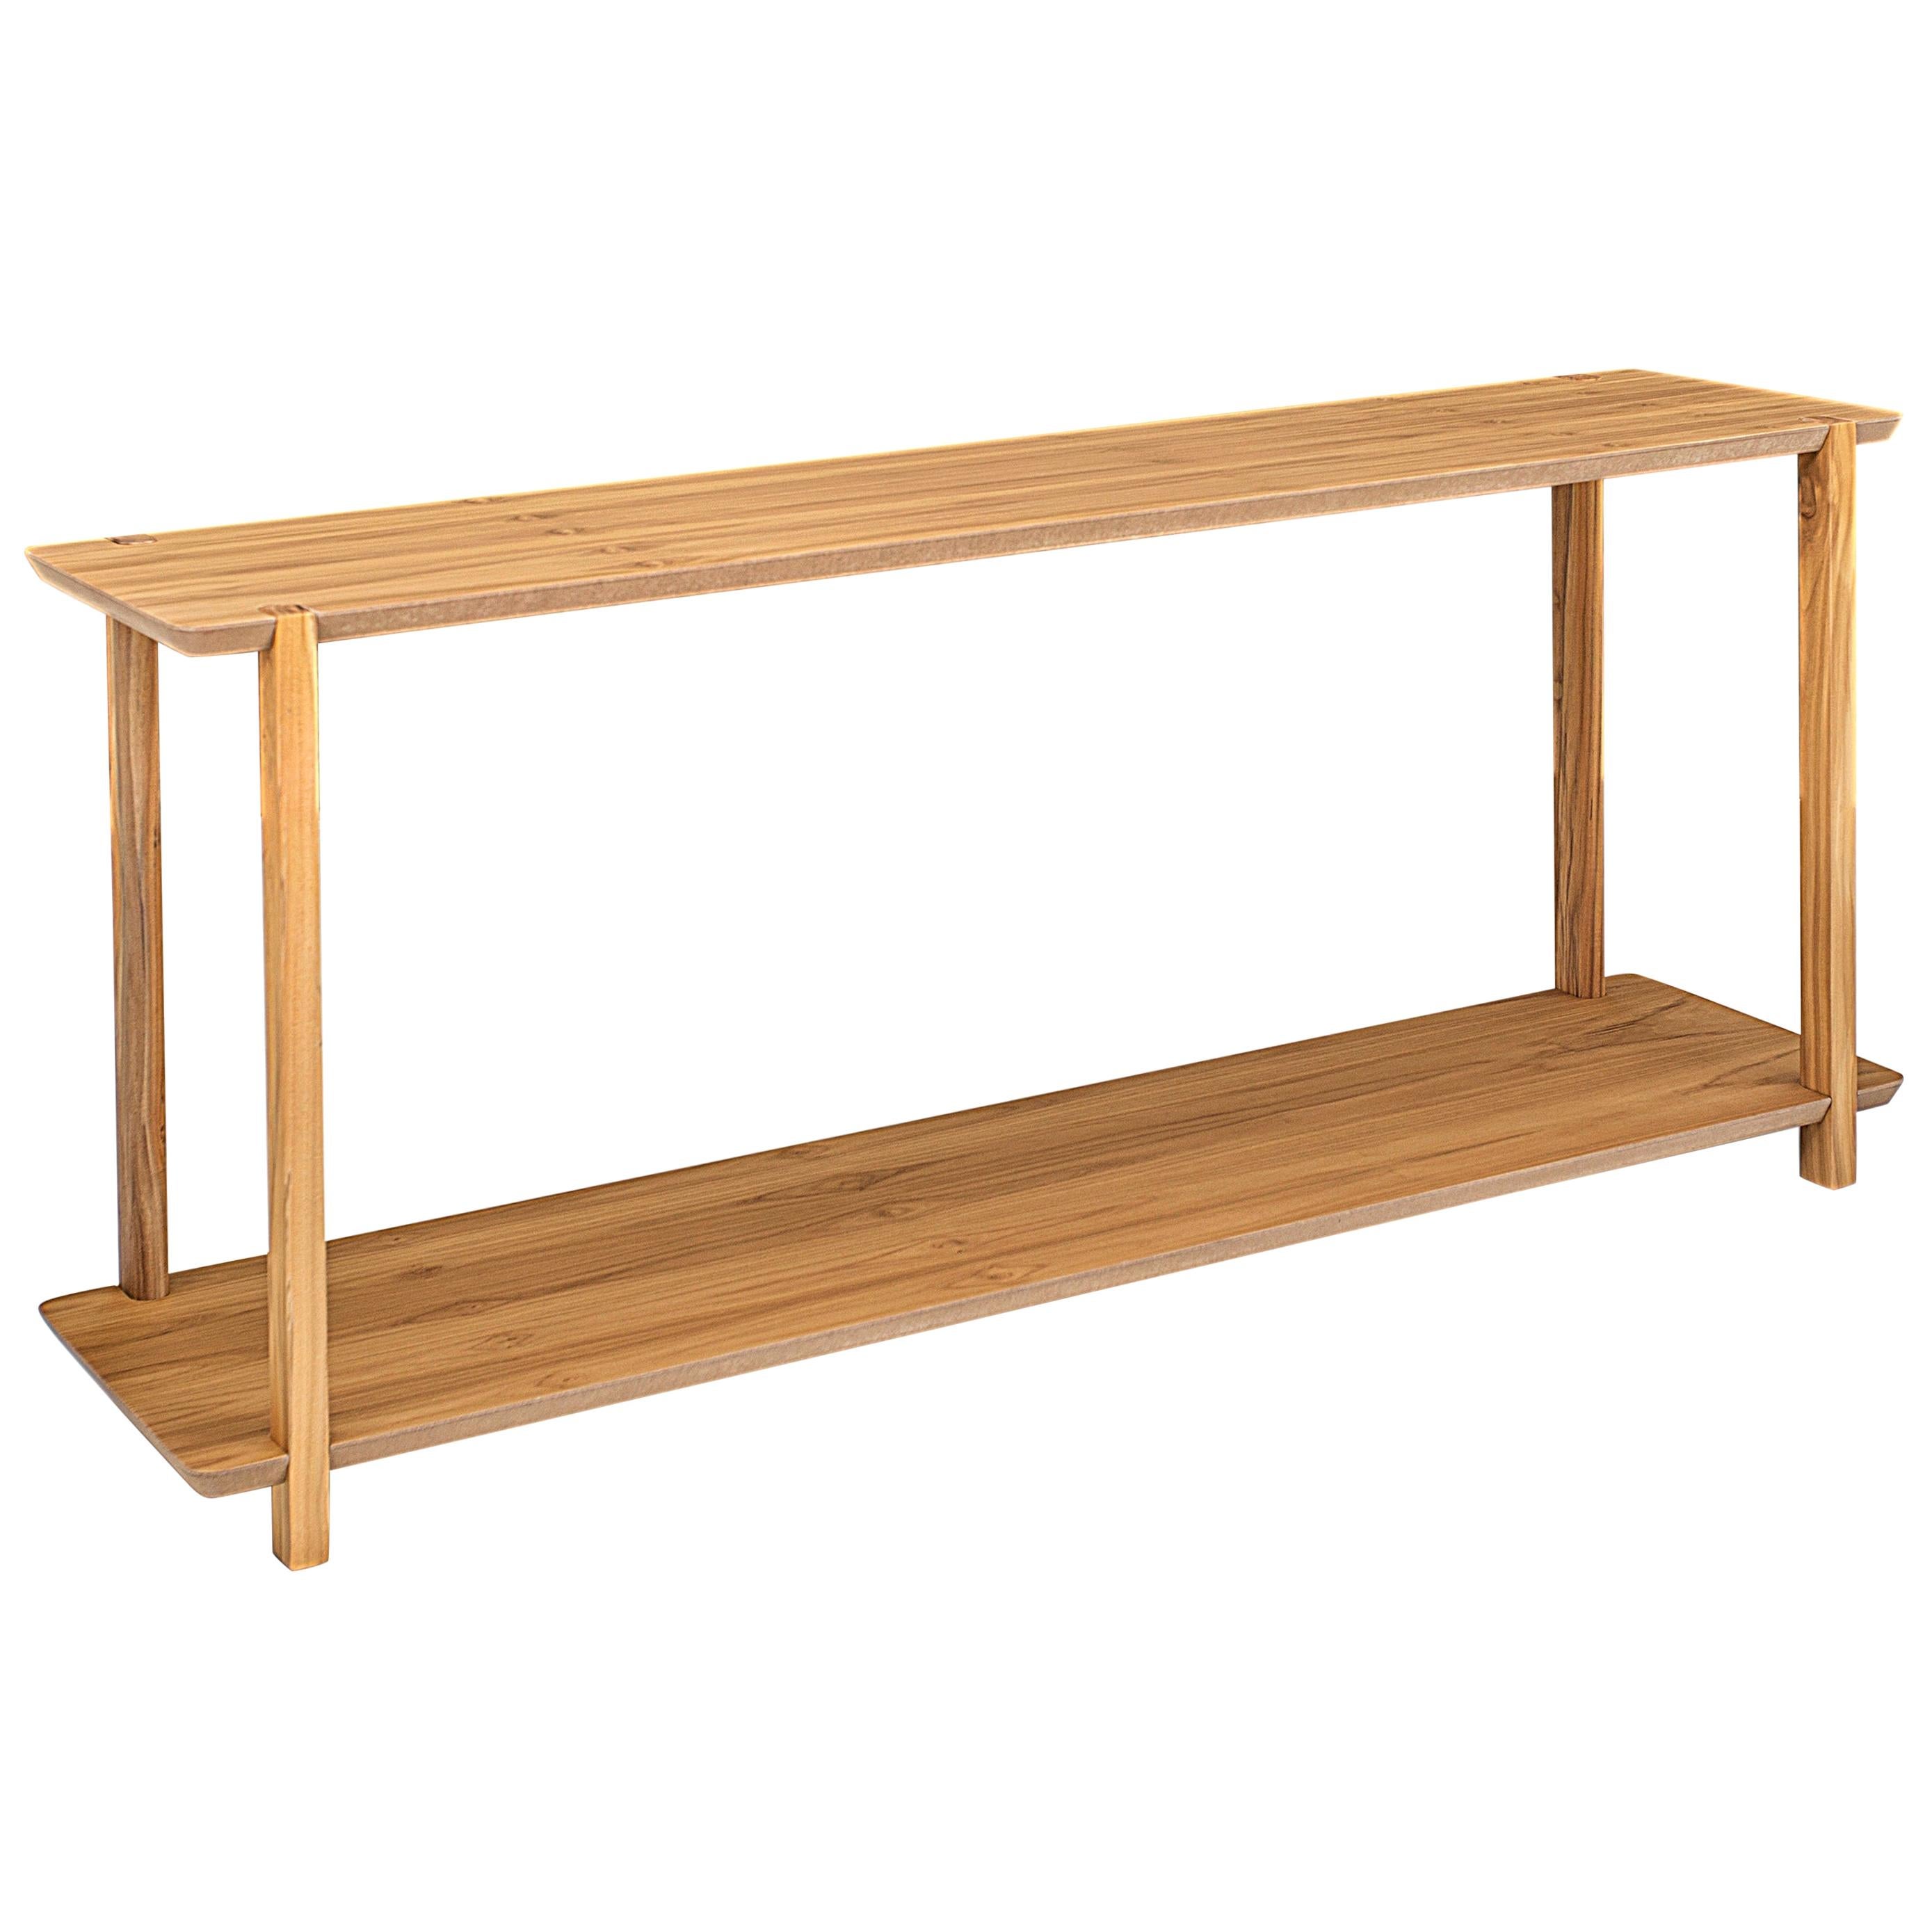 Clan Console Table in Teak Wood Finish 63''